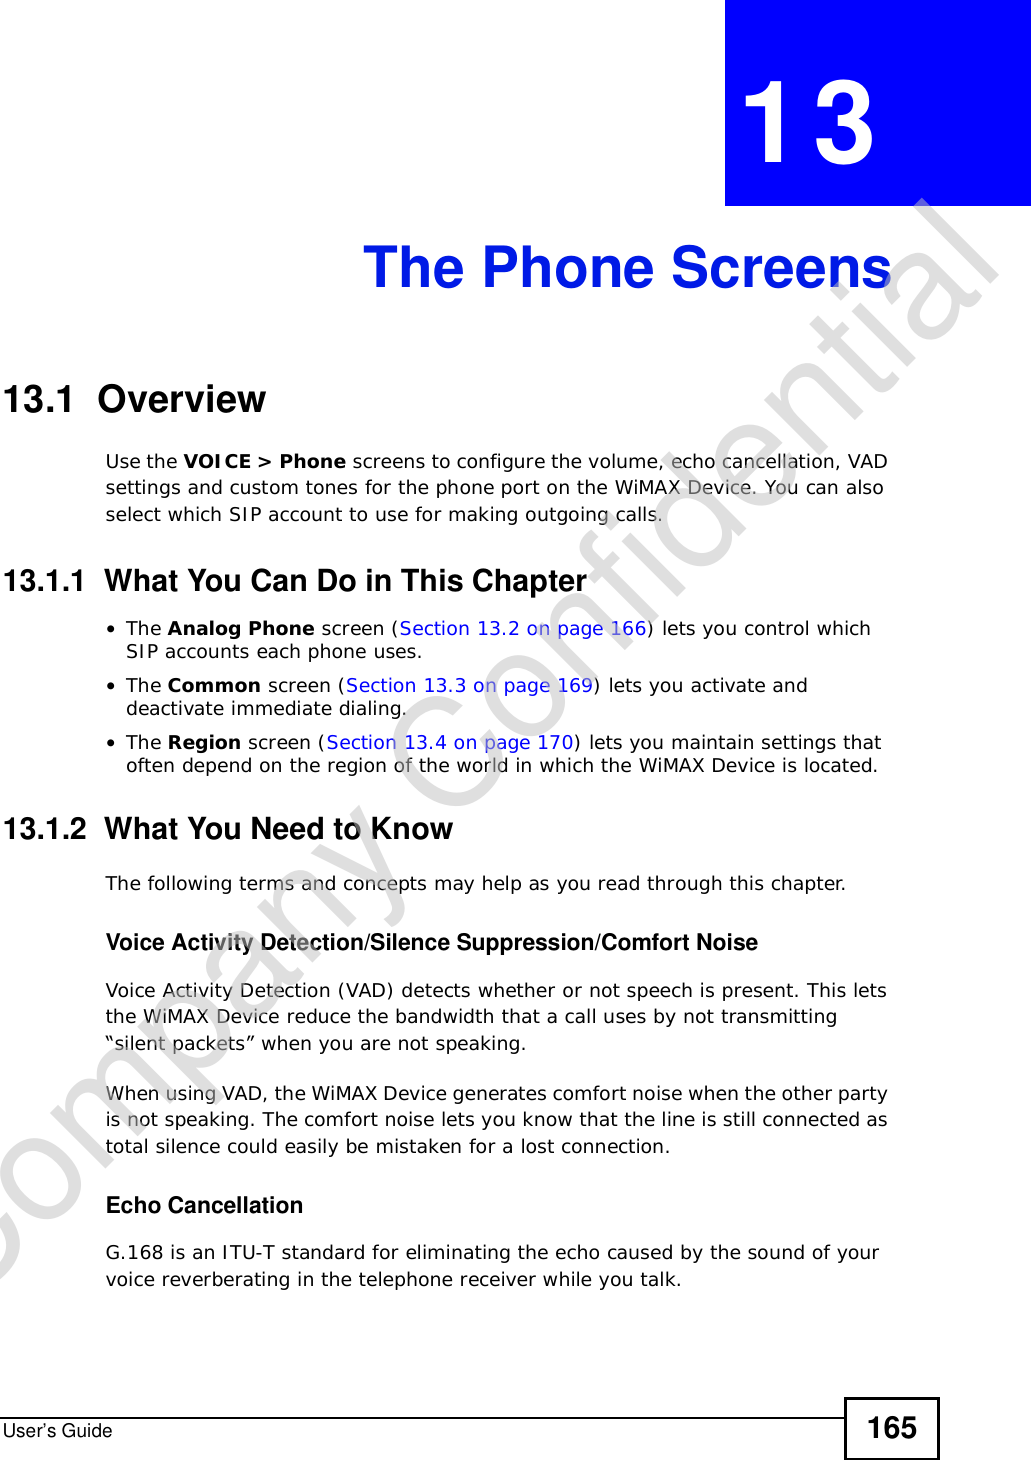 User’s Guide 165CHAPTER 13The Phone Screens13.1  OverviewUse the VOICE &gt; Phone screens to configure the volume, echo cancellation, VAD settings and custom tones for the phone port on the WiMAX Device. You can also select which SIP account to use for making outgoing calls.13.1.1  What You Can Do in This Chapter•The Analog Phone screen (Section 13.2 on page 166) lets you control which SIP accounts each phone uses.•The Common screen (Section 13.3 on page 169) lets you activate and deactivate immediate dialing.•The Region screen (Section 13.4 on page 170) lets you maintain settings that often depend on the region of the world in which the WiMAX Device is located.13.1.2  What You Need to KnowThe following terms and concepts may help as you read through this chapter.Voice Activity Detection/Silence Suppression/Comfort NoiseVoice Activity Detection (VAD) detects whether or not speech is present. This lets the WiMAX Device reduce the bandwidth that a call uses by not transmitting “silent packets” when you are not speaking.When using VAD, the WiMAX Device generates comfort noise when the other party is not speaking. The comfort noise lets you know that the line is still connected as total silence could easily be mistaken for a lost connection.Echo Cancellation G.168 is an ITU-T standard for eliminating the echo caused by the sound of your voice reverberating in the telephone receiver while you talk.Company Confidential